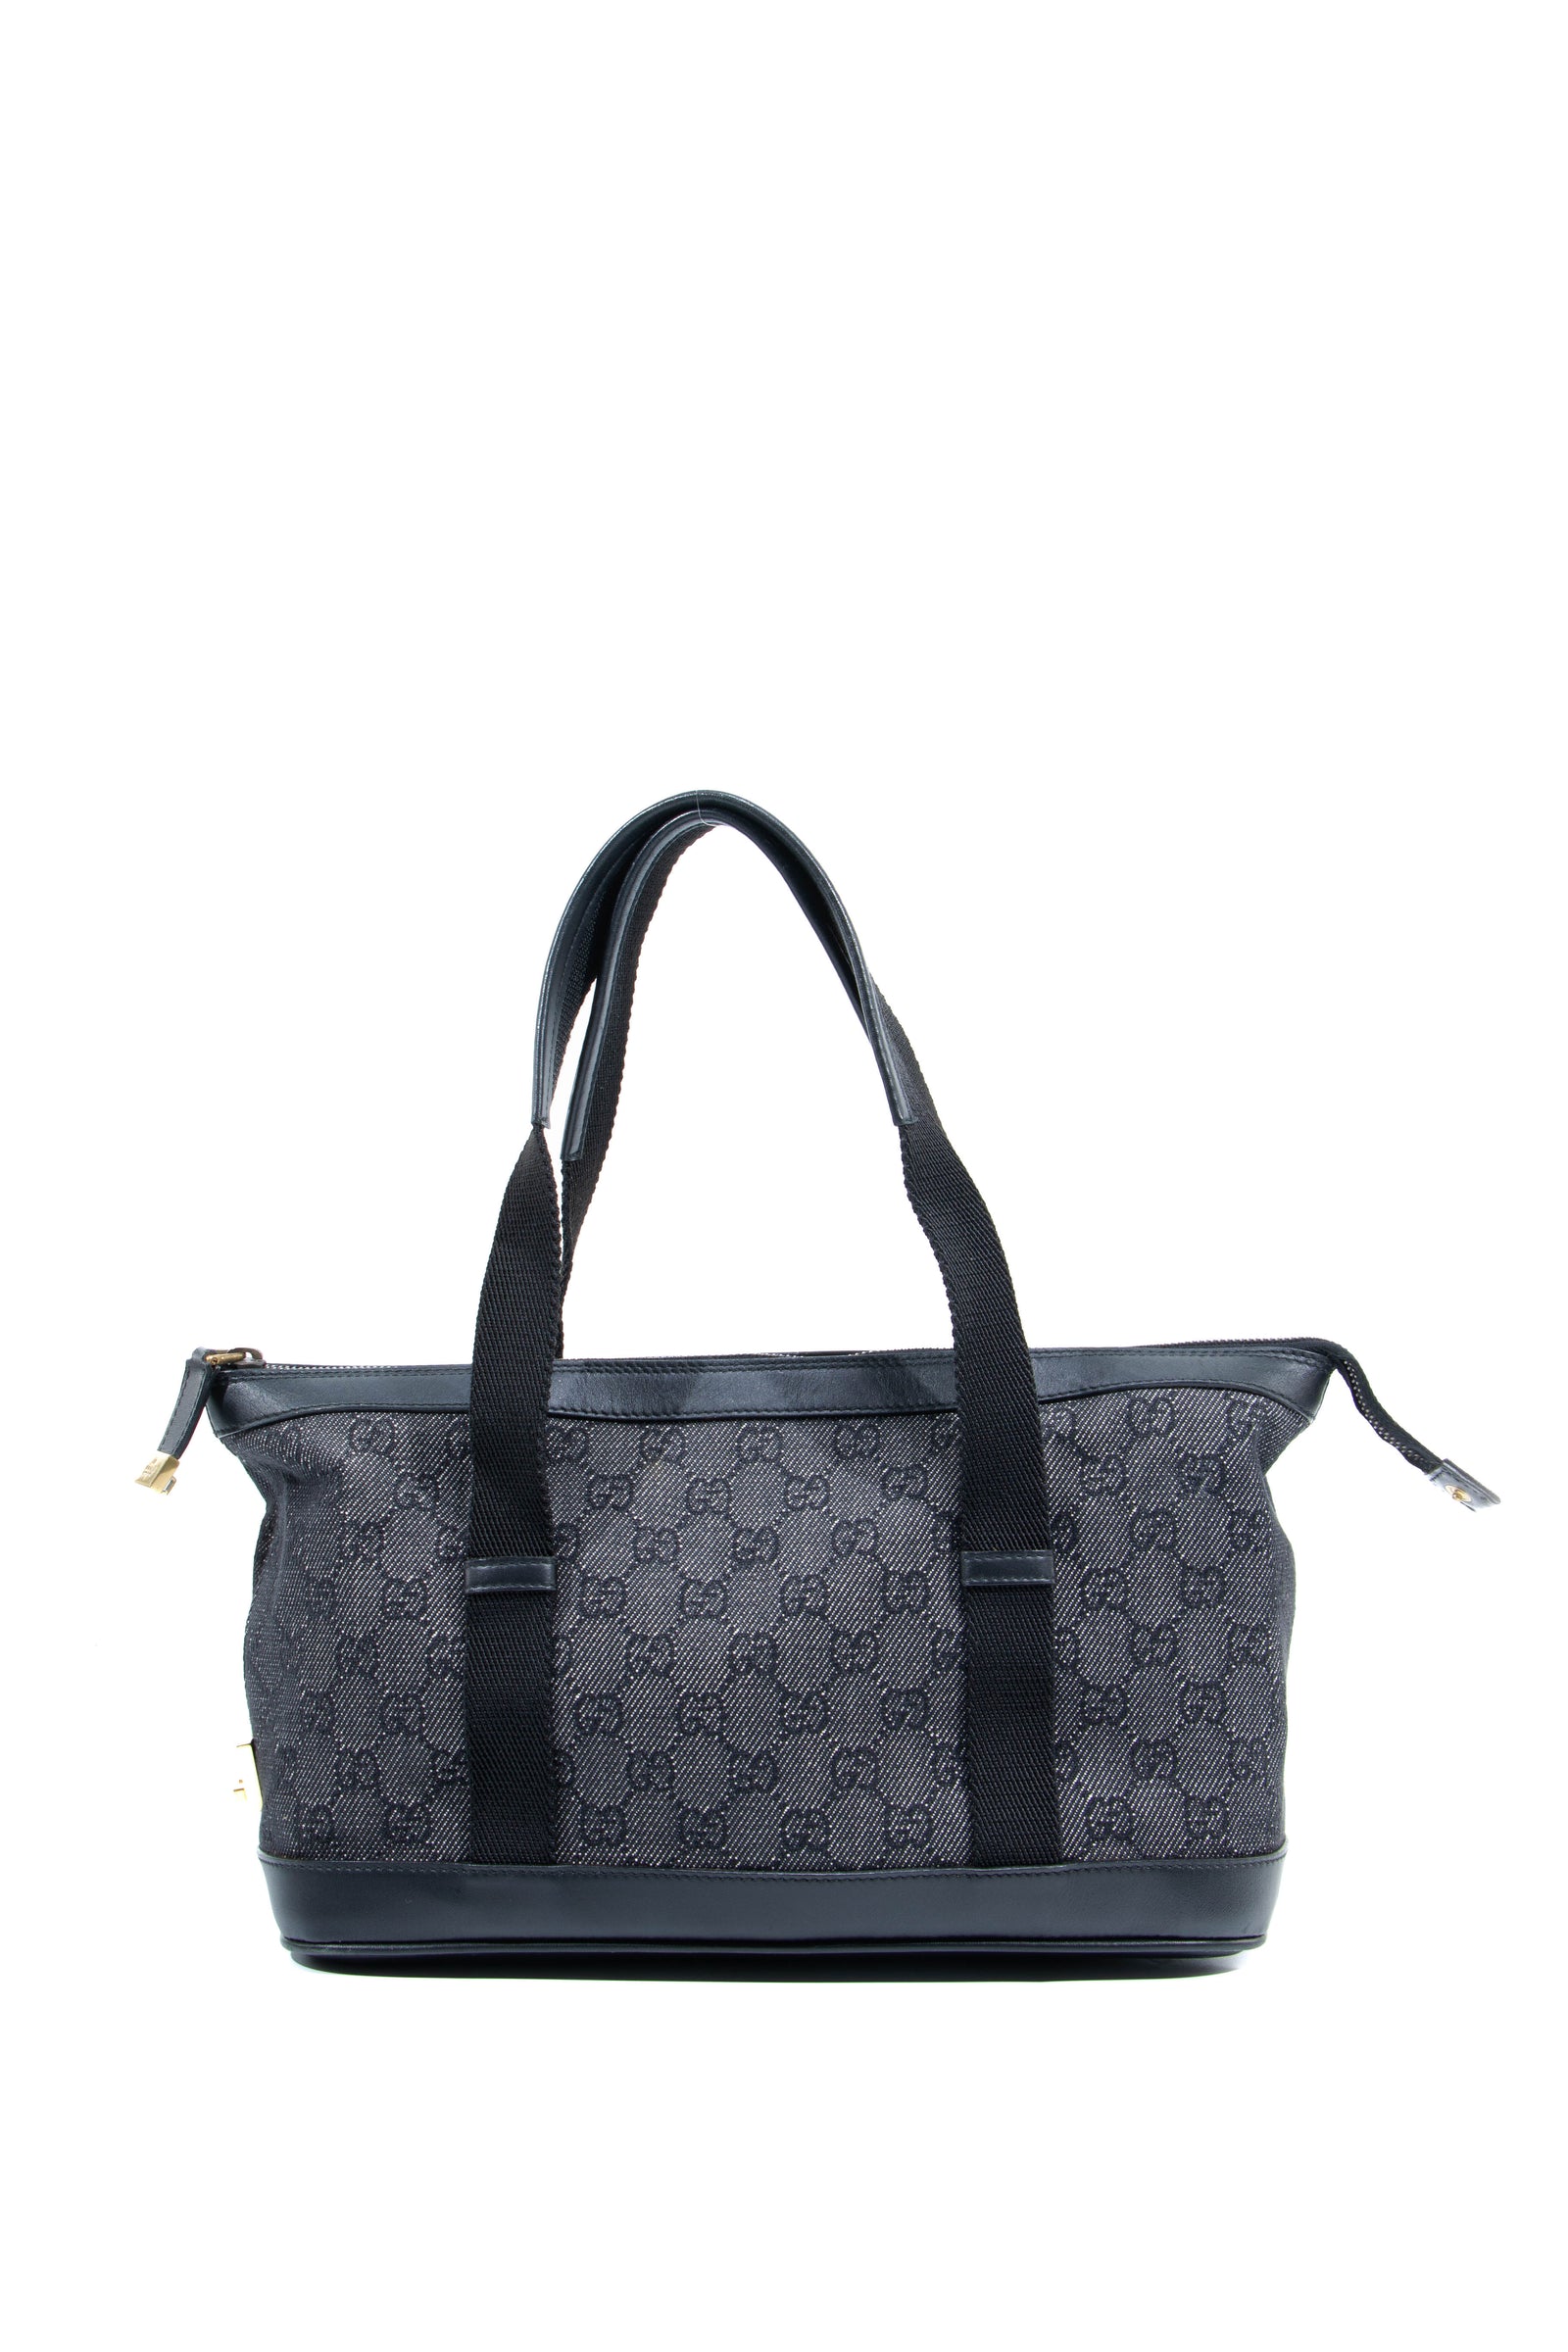 Gucci Bags - Shop your next Gucci Bag at Collector's Cage